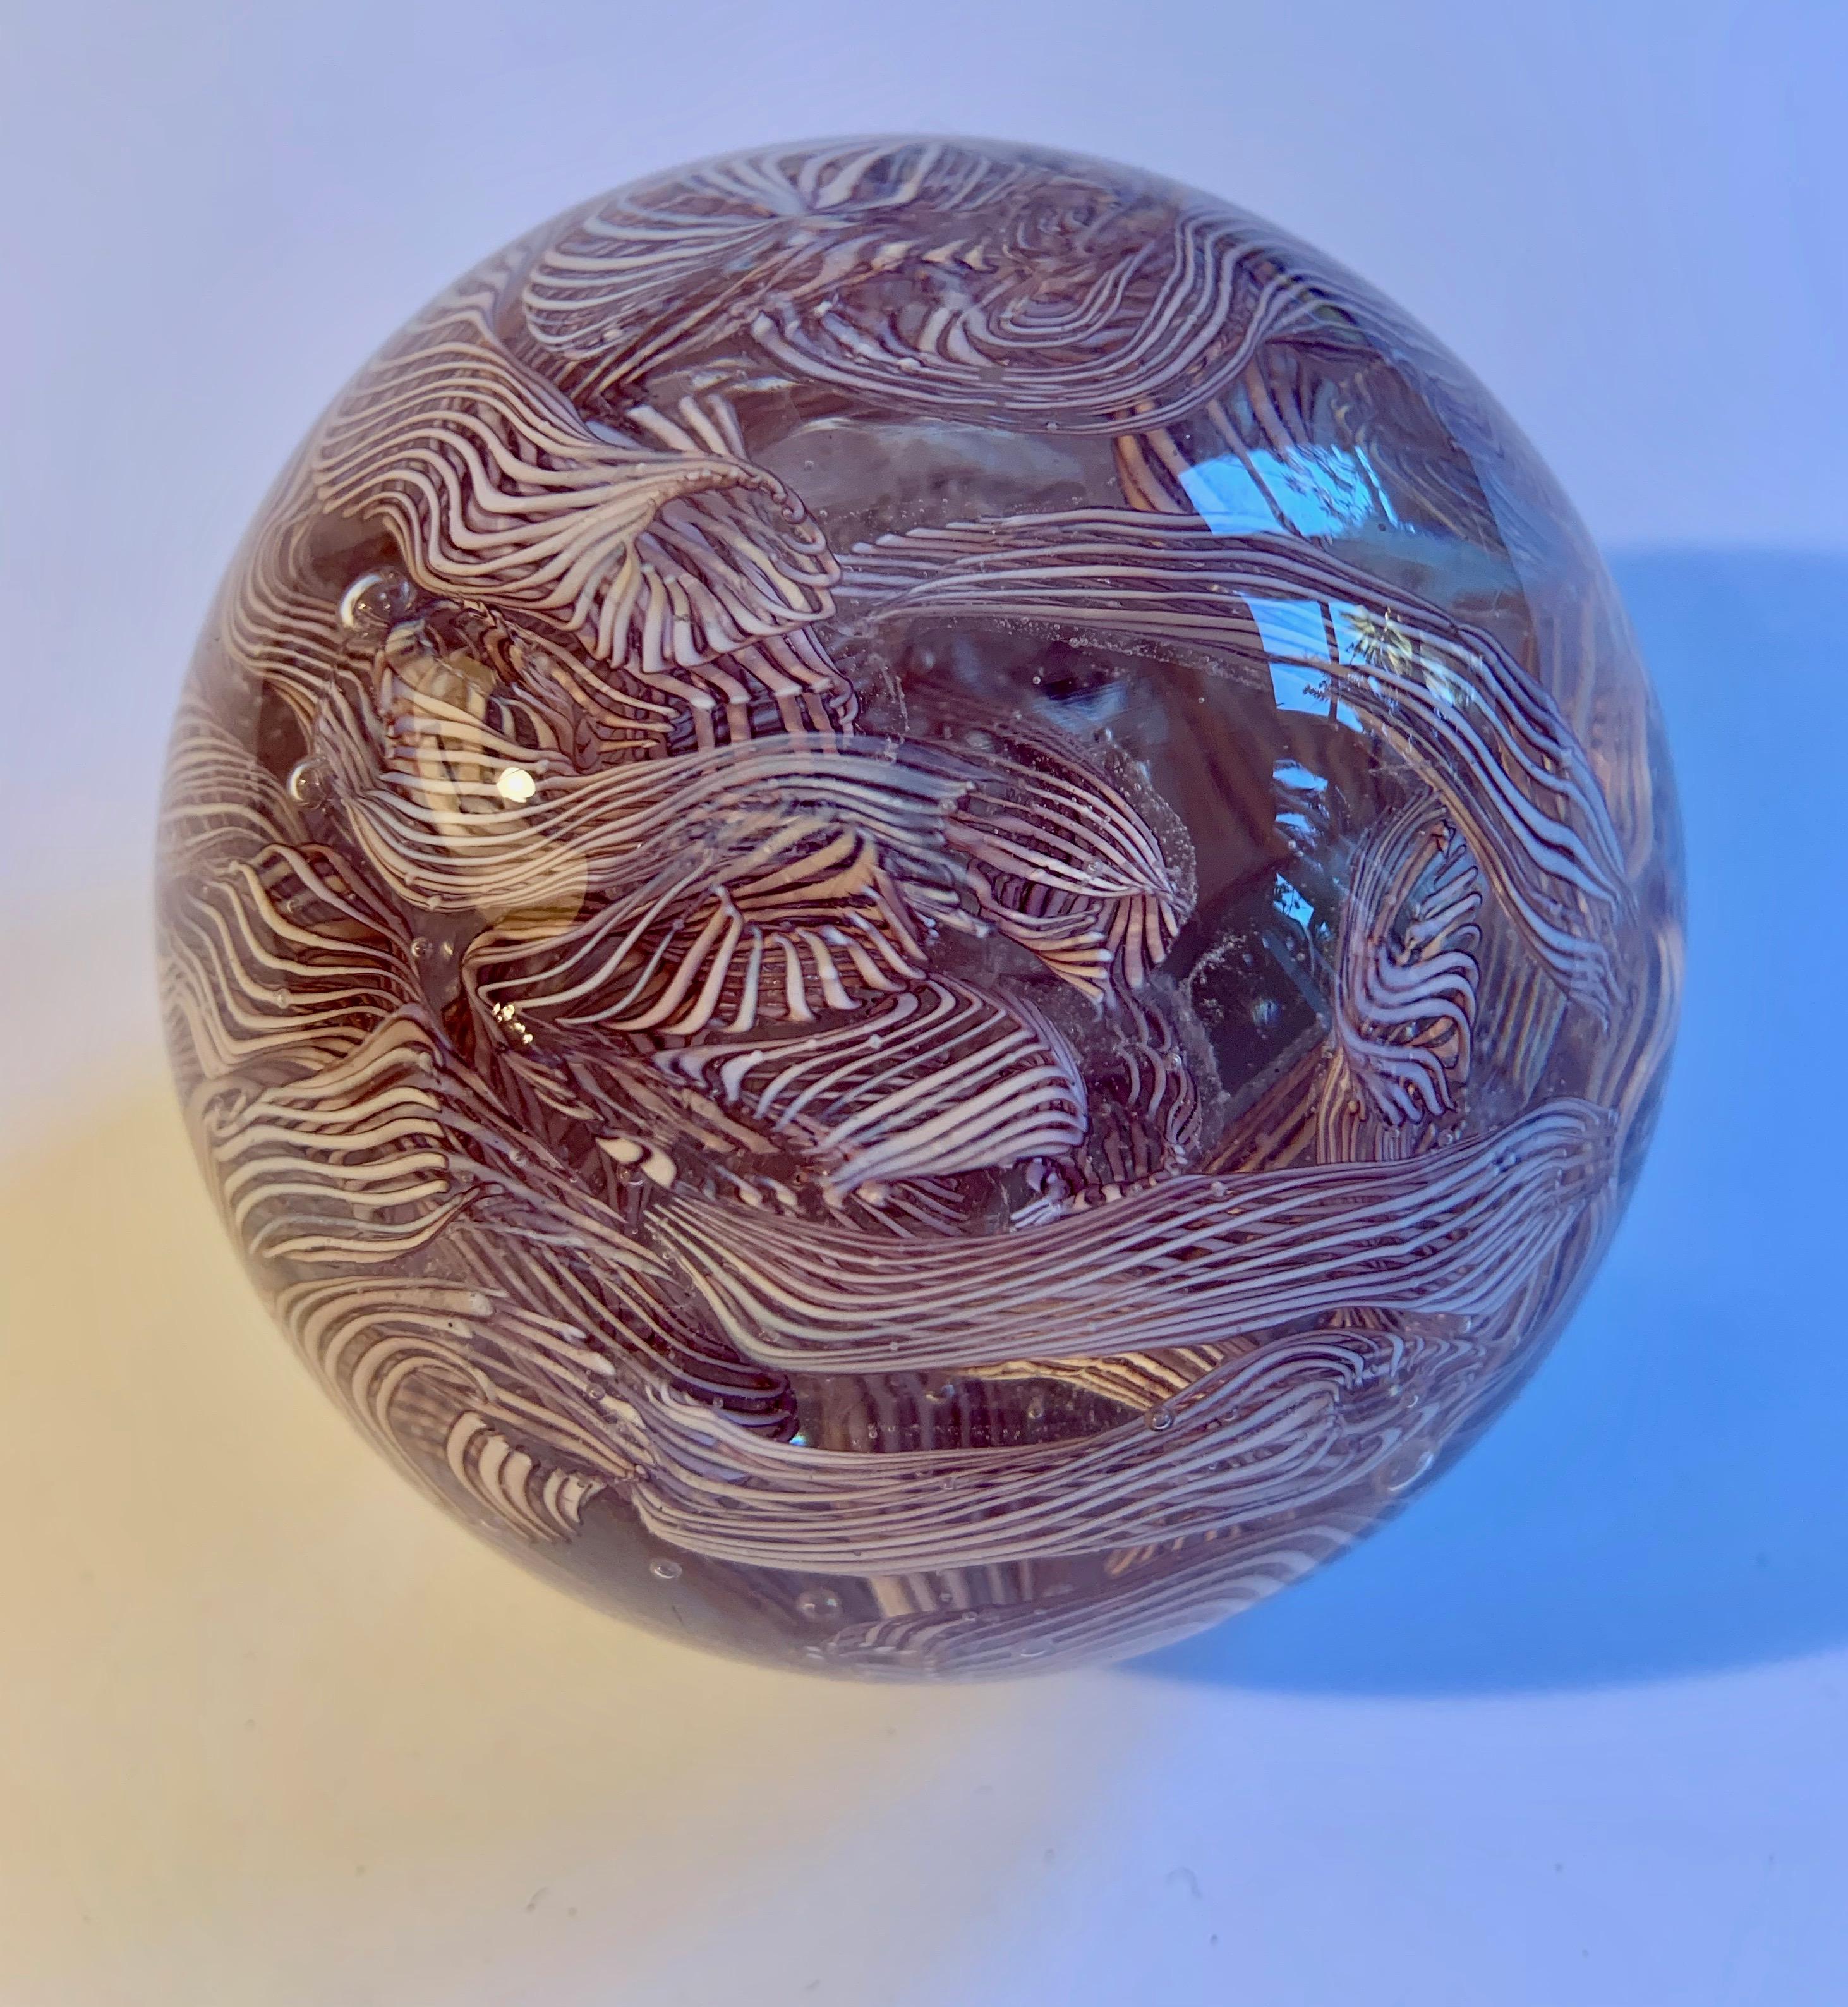 An intricate and lovely multi-ribbon detailed glass sphere. A wonderful decorative paperweight